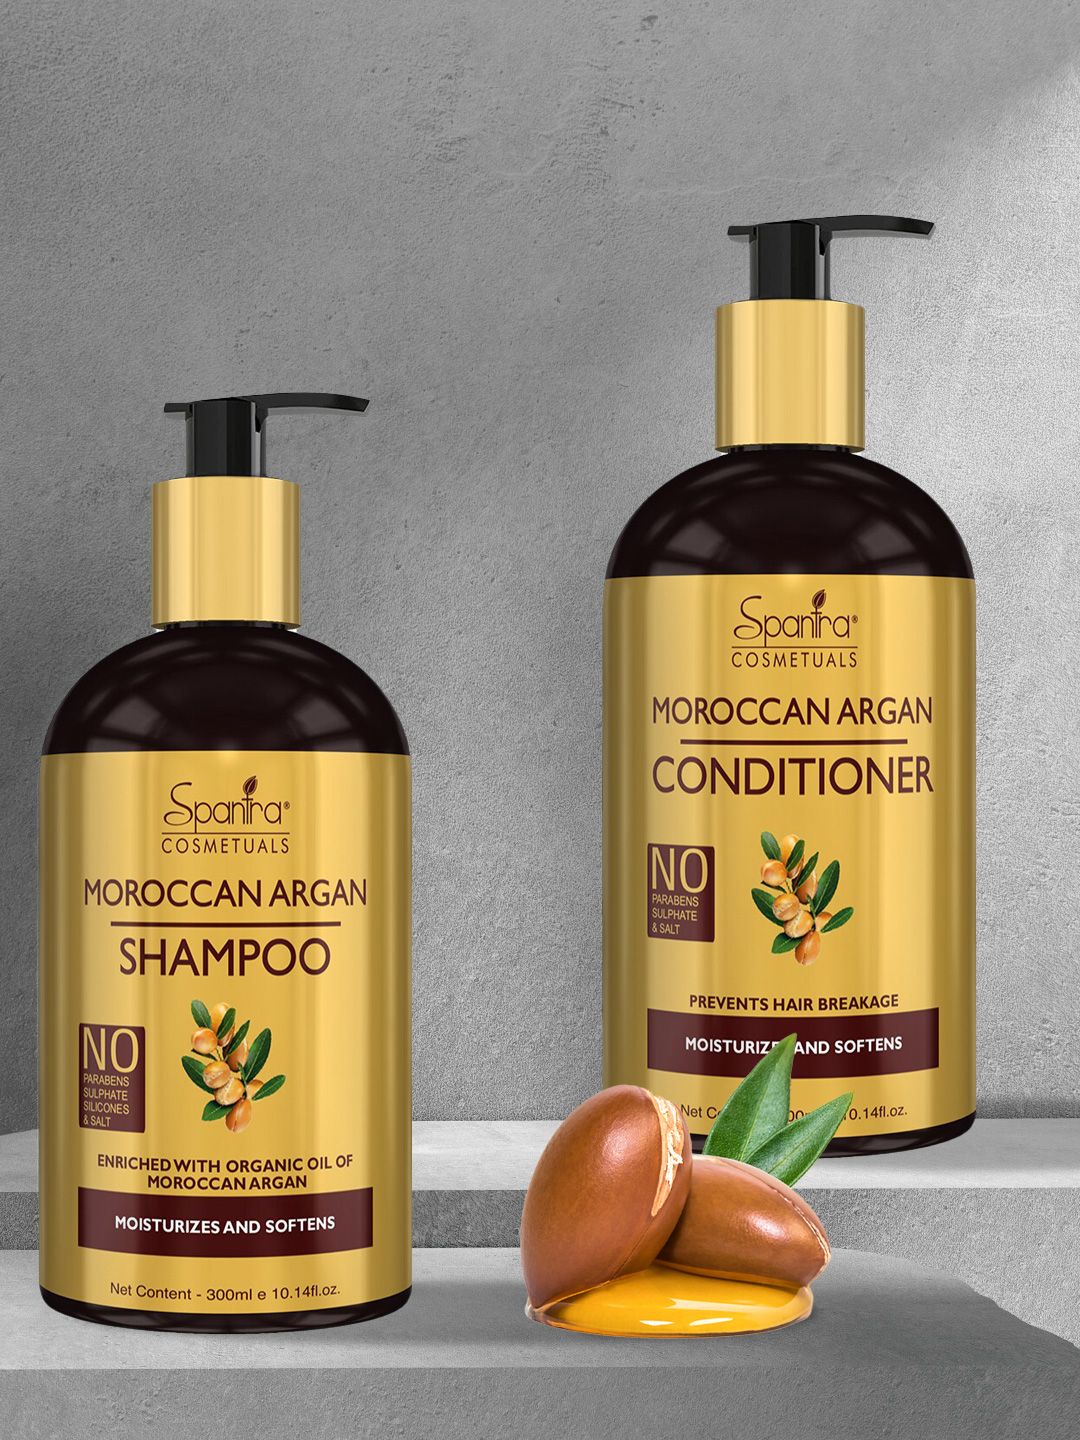 Spantra Moroccan Argan Shampoo & Conditioner with Hair Mask Price in India